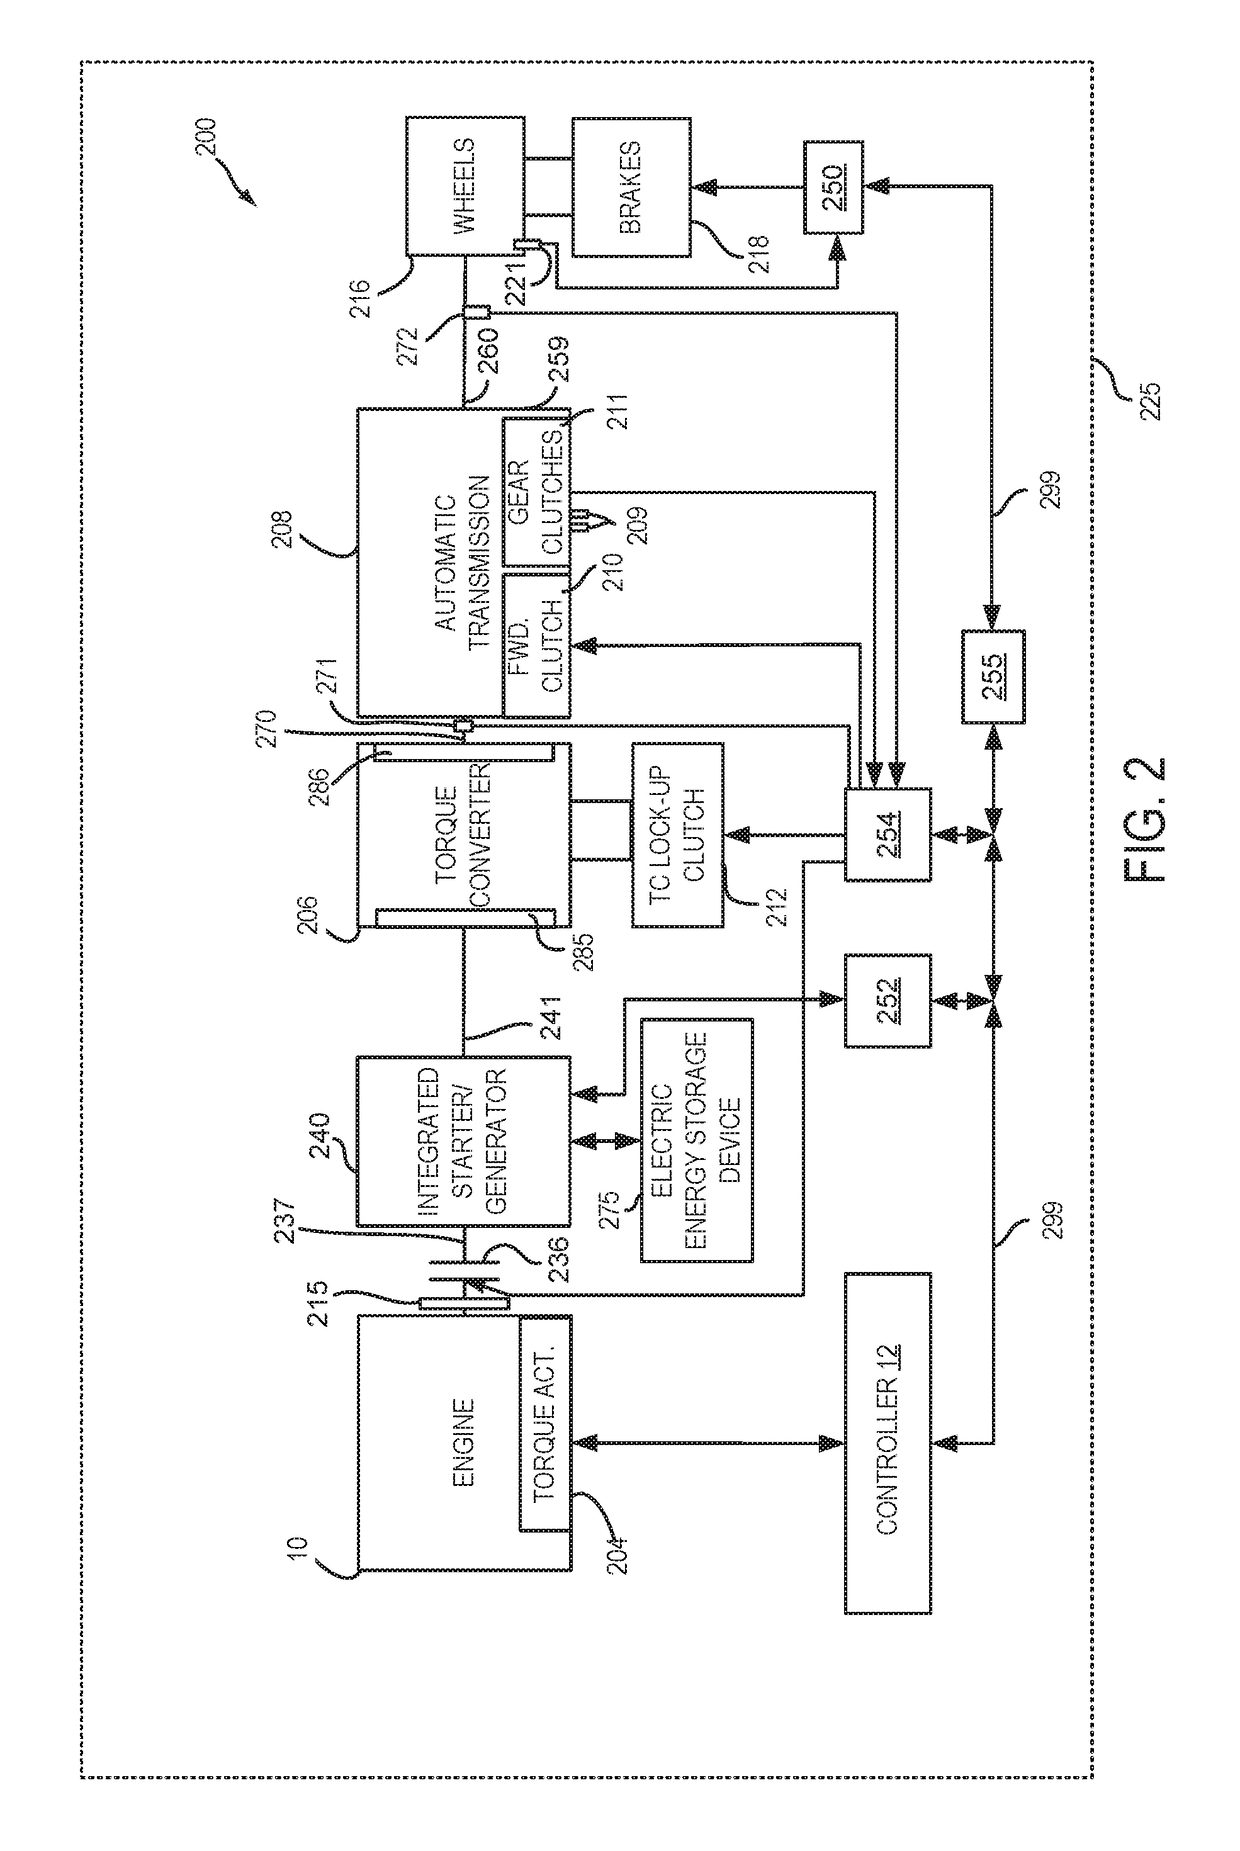 Methods and system for mitigating engine and motor torque disturbances of a hybrid vehicle